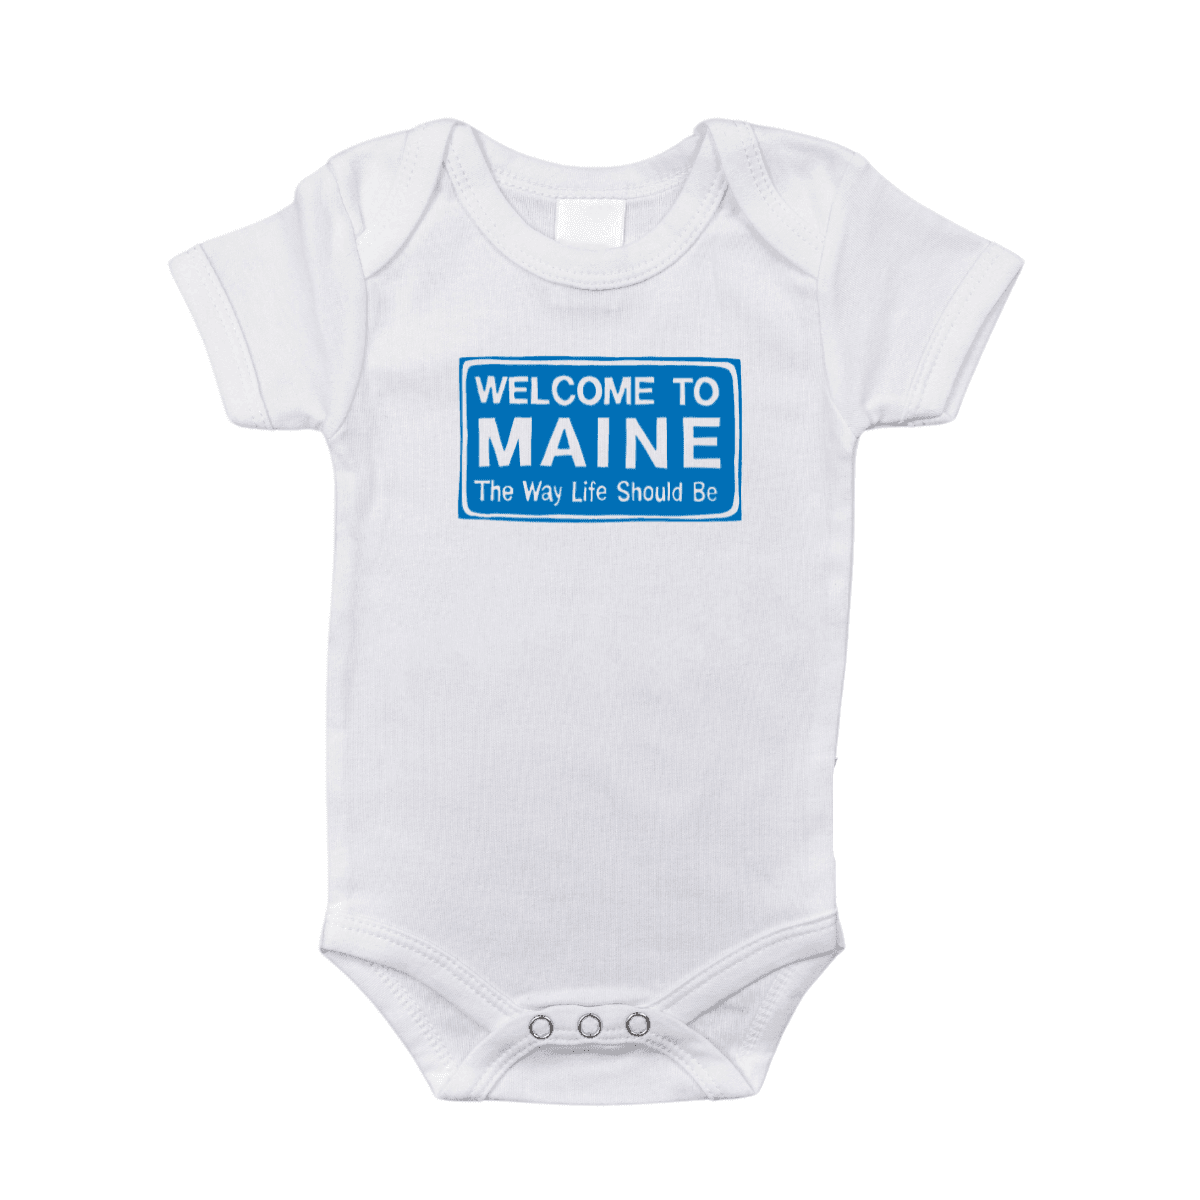 White baby onesie with "Welcome to Maine" and a lobster graphic, set against a plain background.